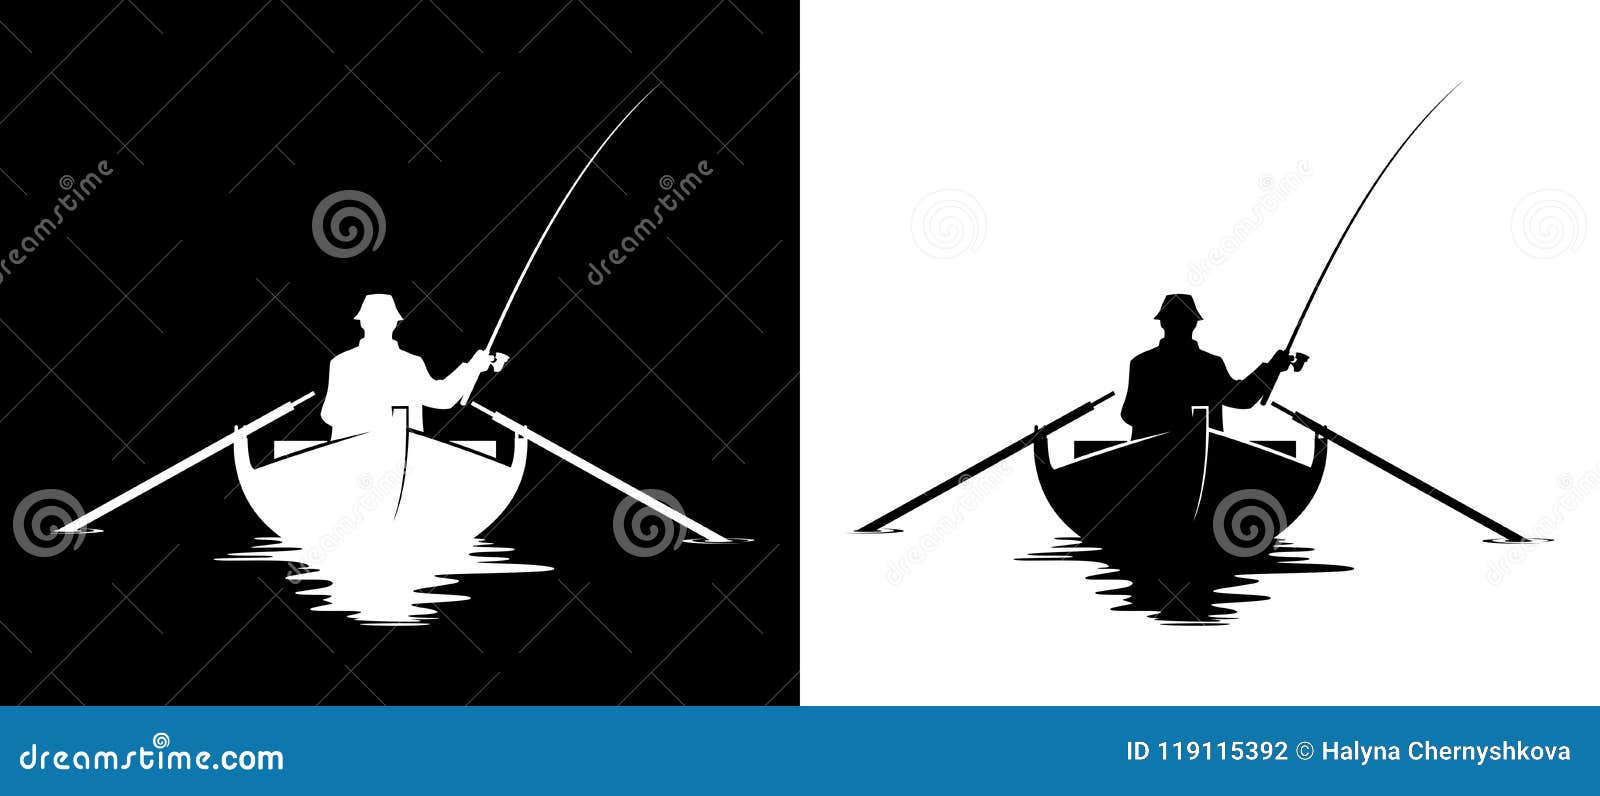 Download Fisherman In Boat Silhouette Stock Vector - Illustration of sporting, outdoors: 119115392